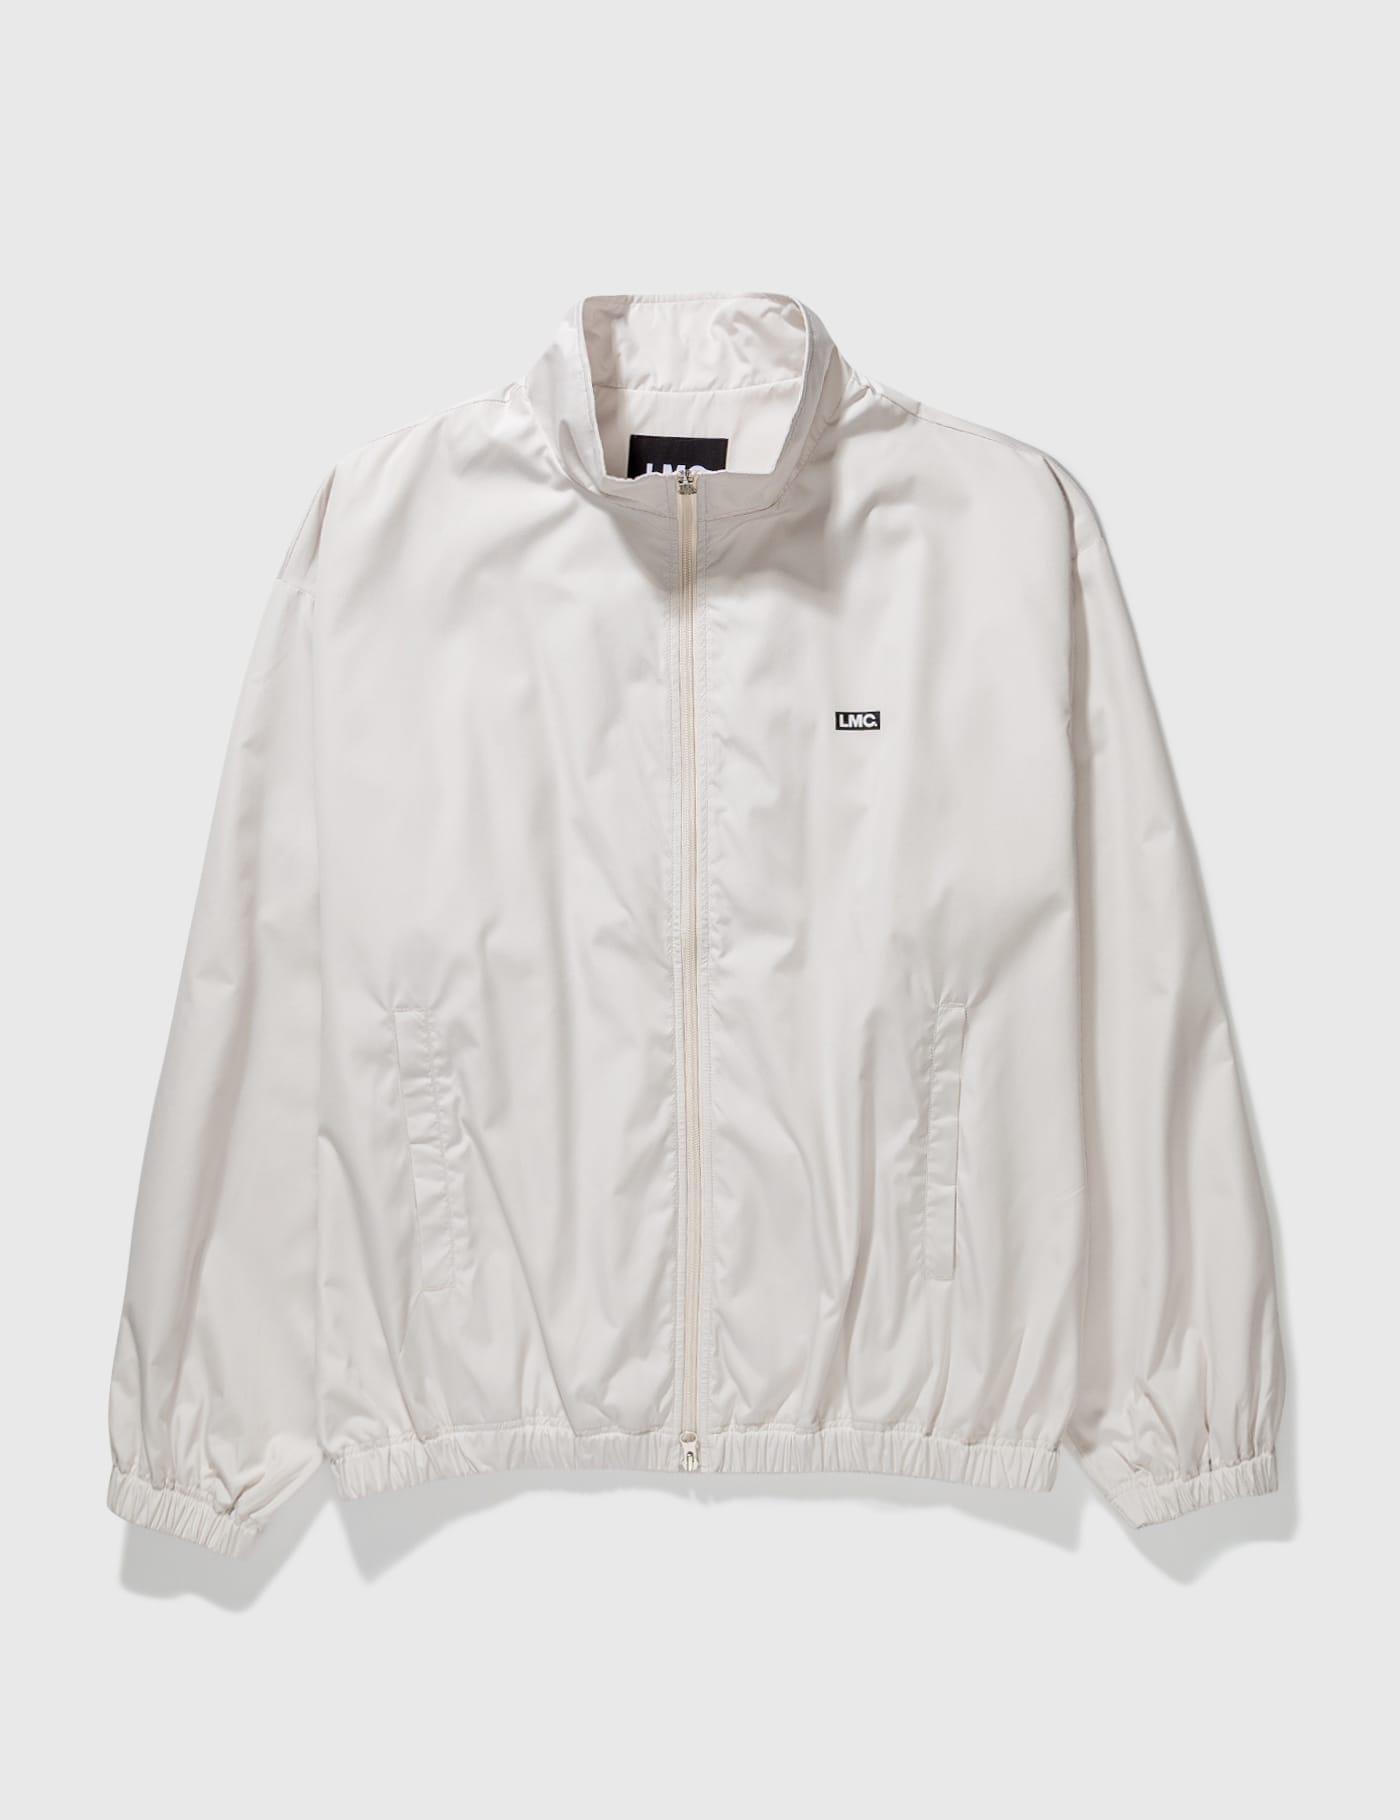 LMC - Ideal Track Jacket | HBX - Globally Curated Fashion and Lifestyle by  Hypebeast